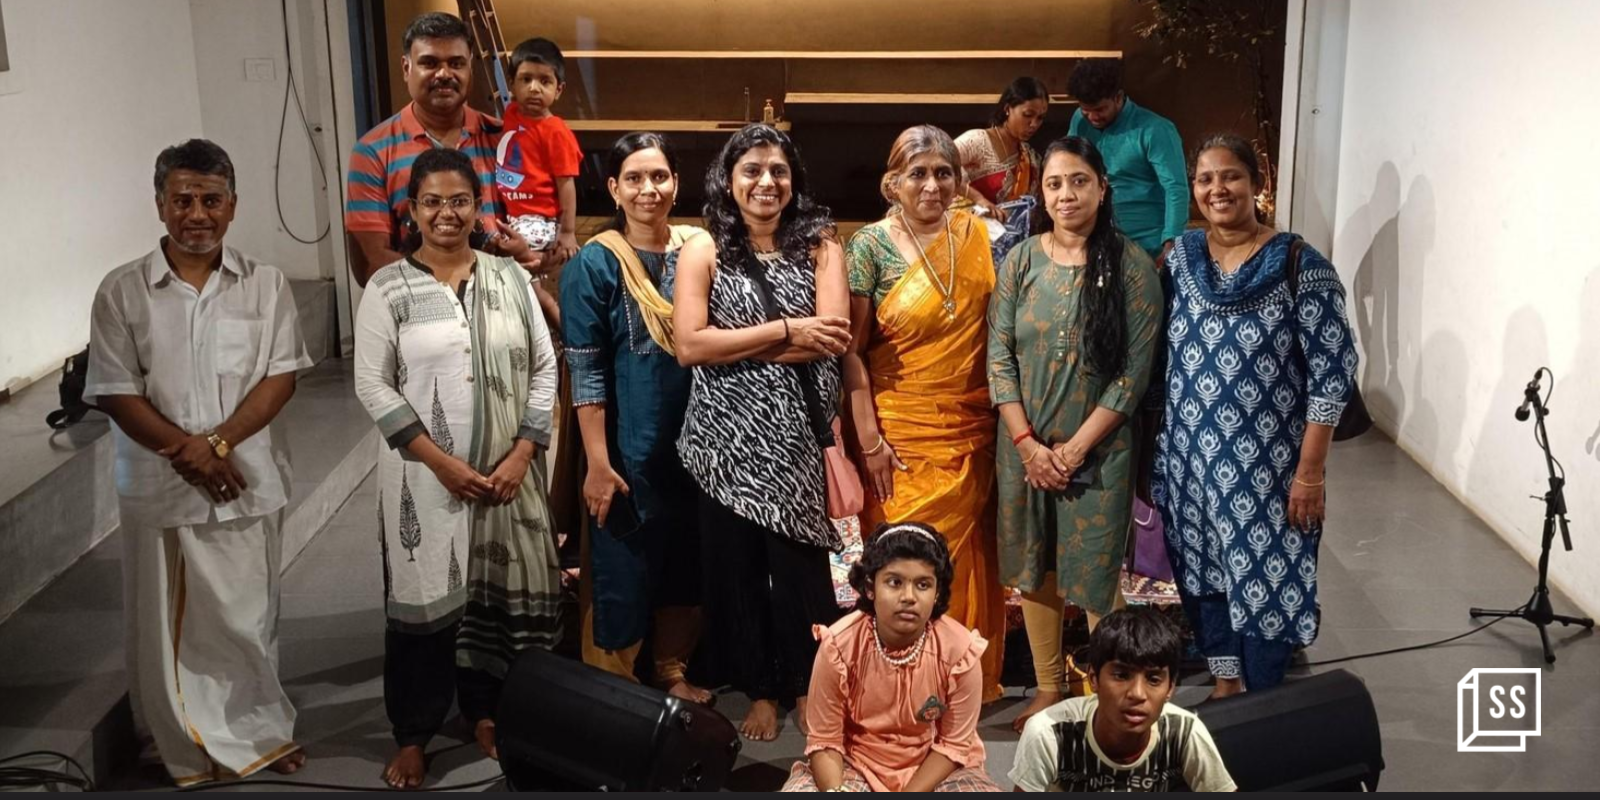 This Chennai-based support group is helping families of children with special needs